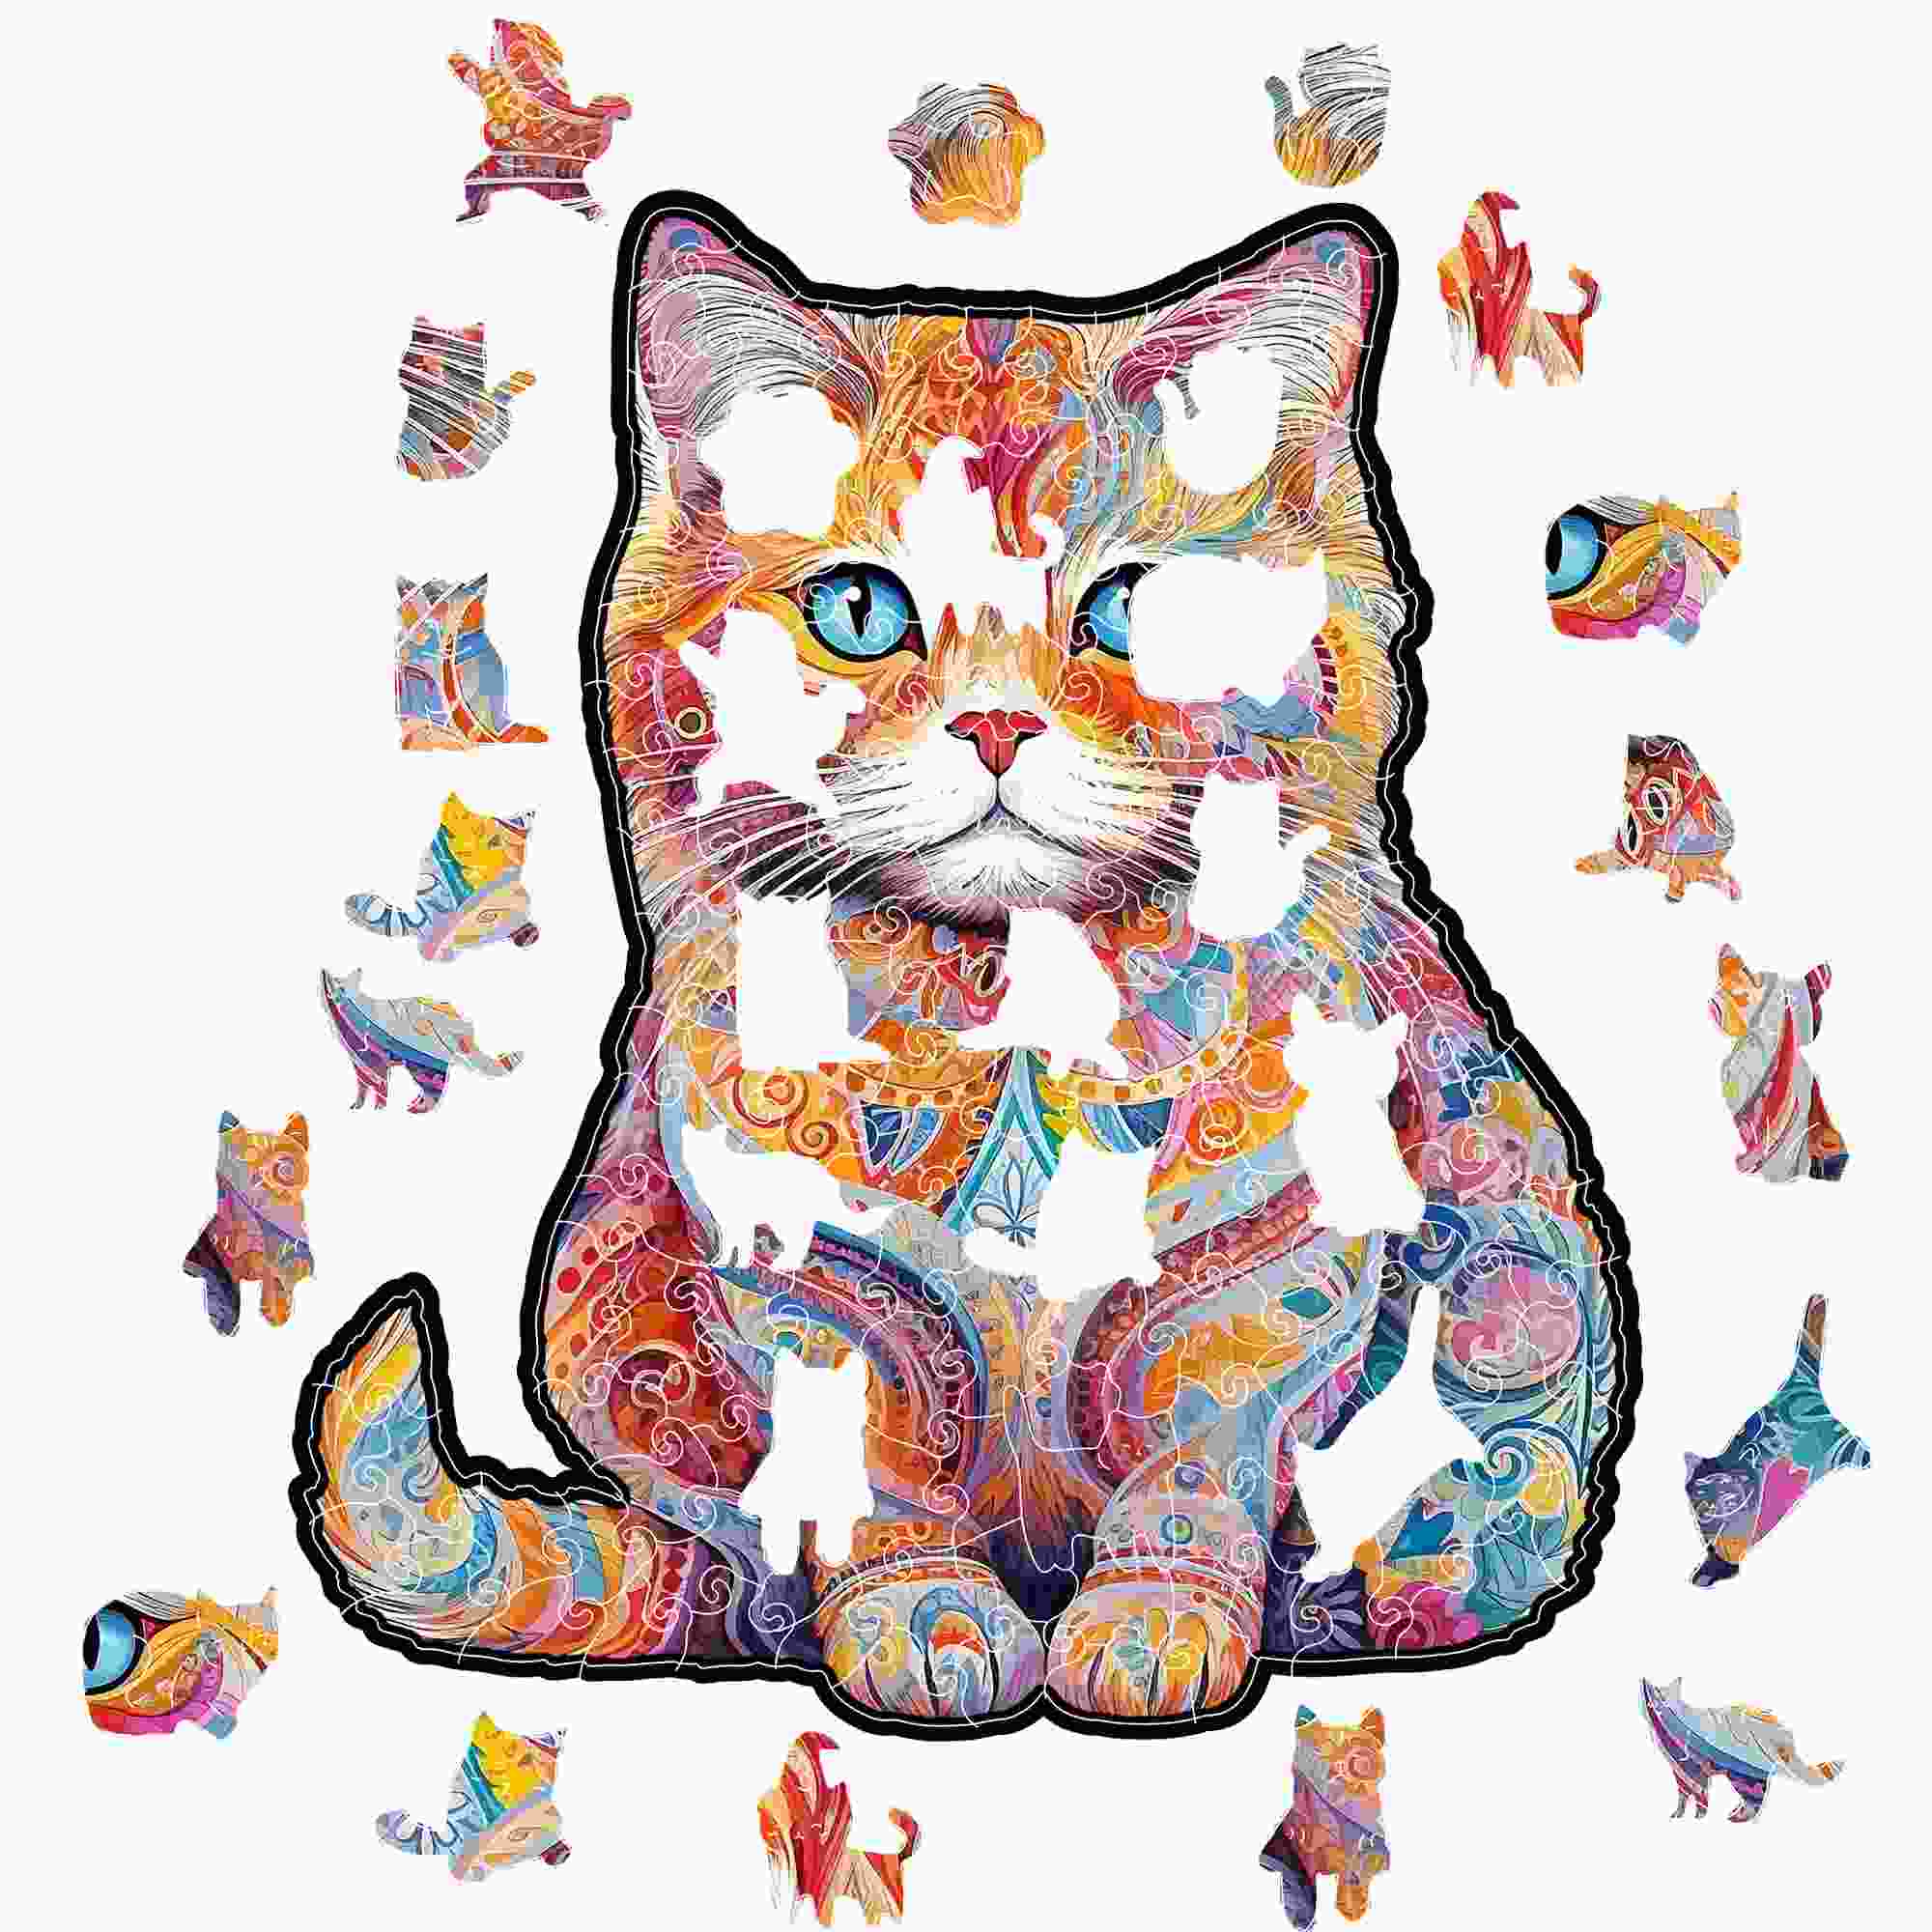 Animal Jigsaw Puzzle > Wooden Jigsaw Puzzle > Jigsaw Puzzle Scottish Cat- Jigsaw Puzzle